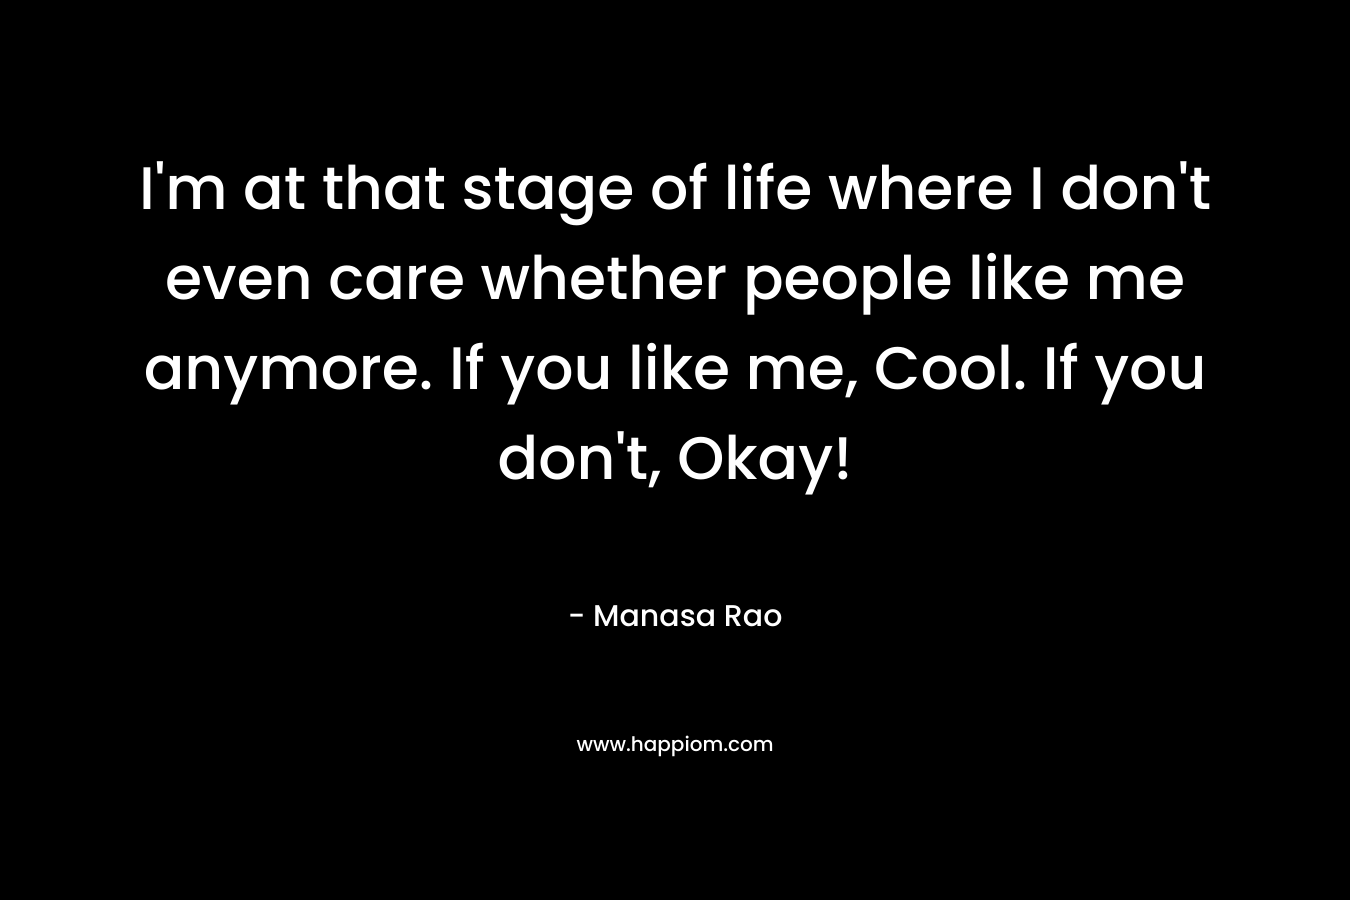 I'm at that stage of life where I don't even care whether people like me anymore. If you like me, Cool. If you don't, Okay!